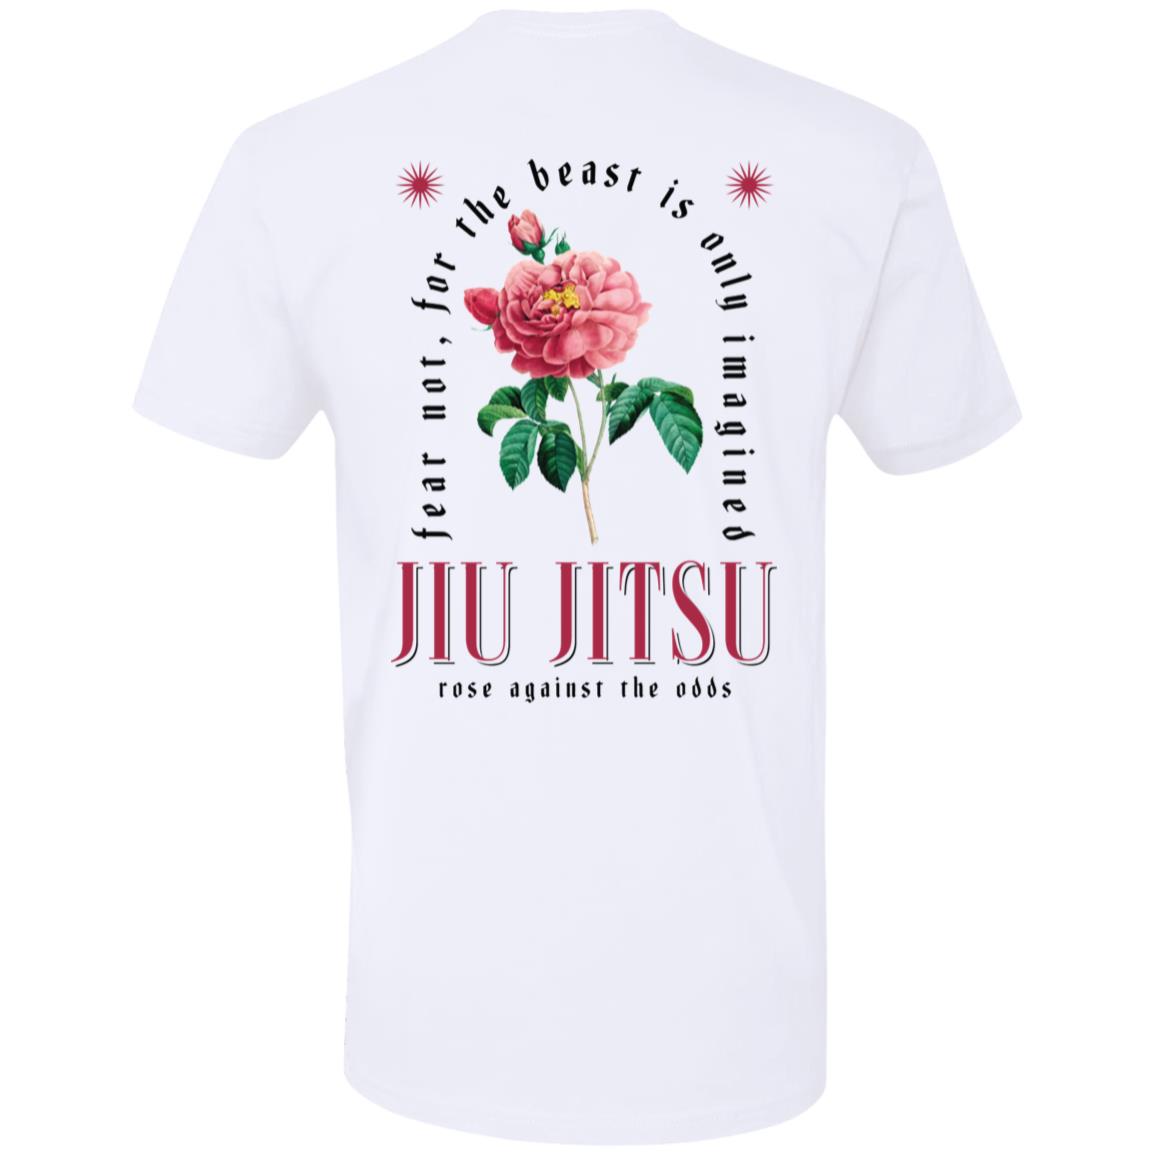 The Beast Is Only Imagined - White t-shirt with graphic design featuring a rose and the phrases "fear not for the imagined beast is only domesticated" and "jiu jitsu rose against the odds".